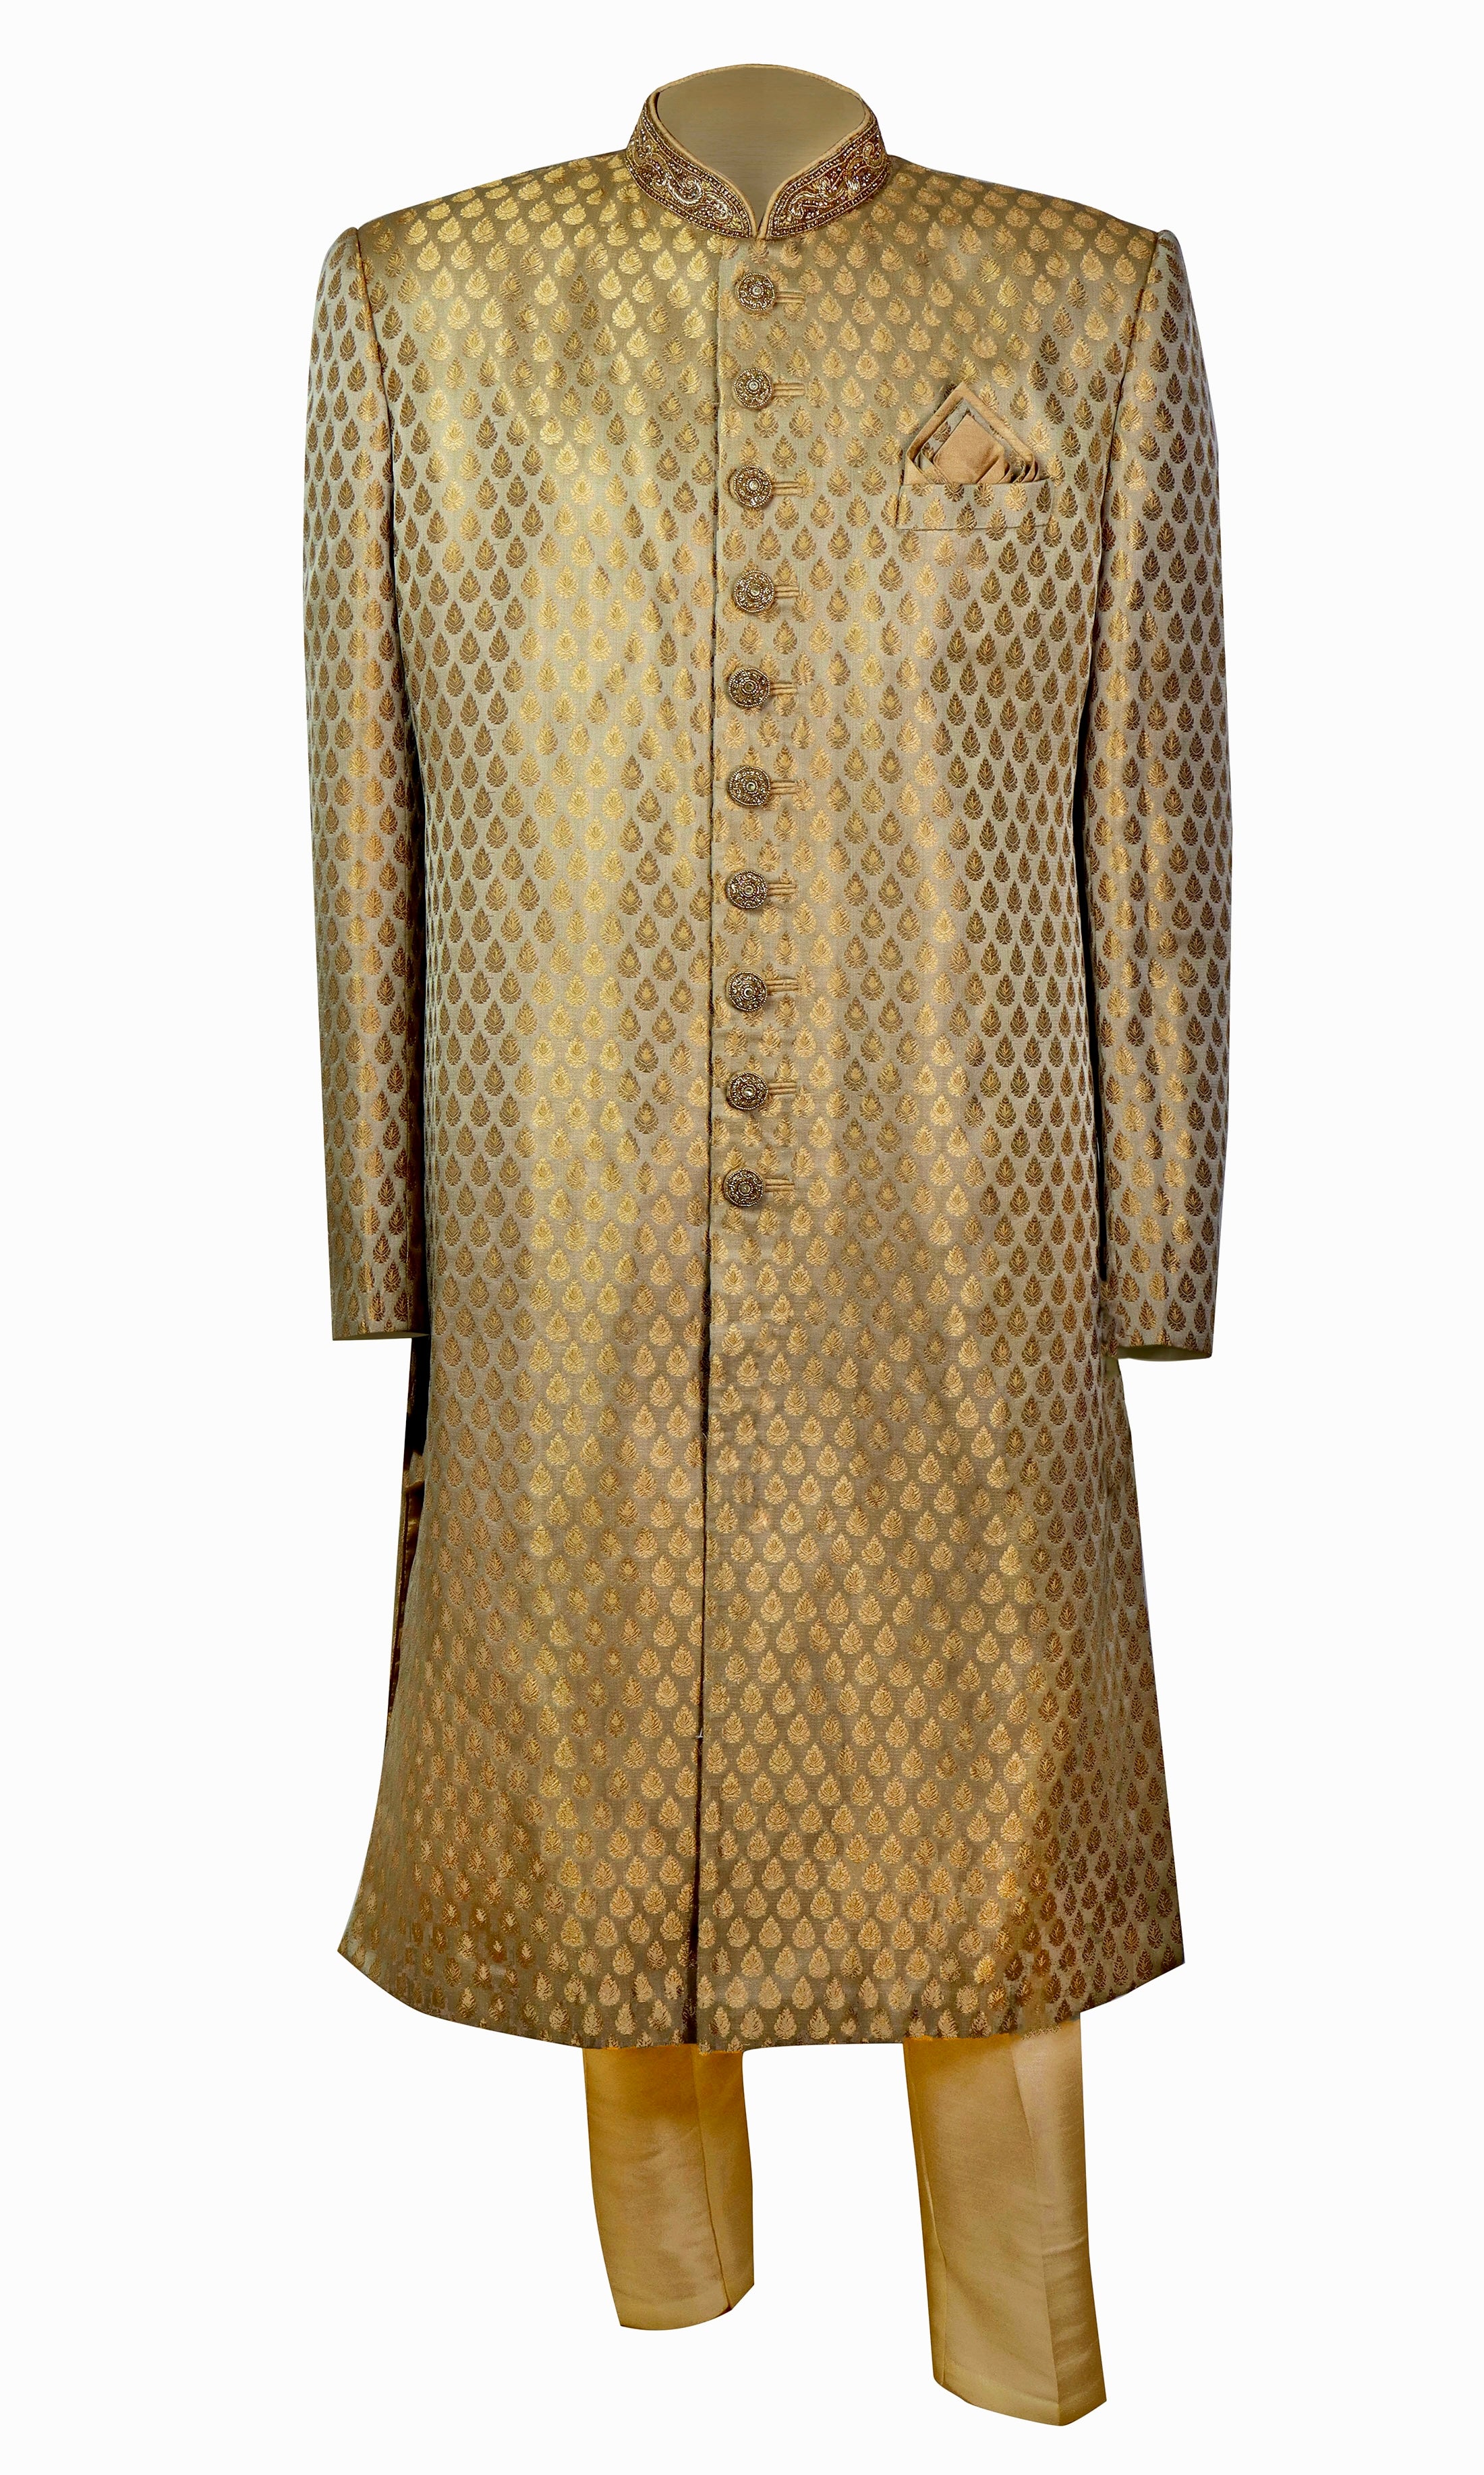  Gold sherwani is so smooth and shiny with subtle beaded embroidery on the buttons and the collars. 